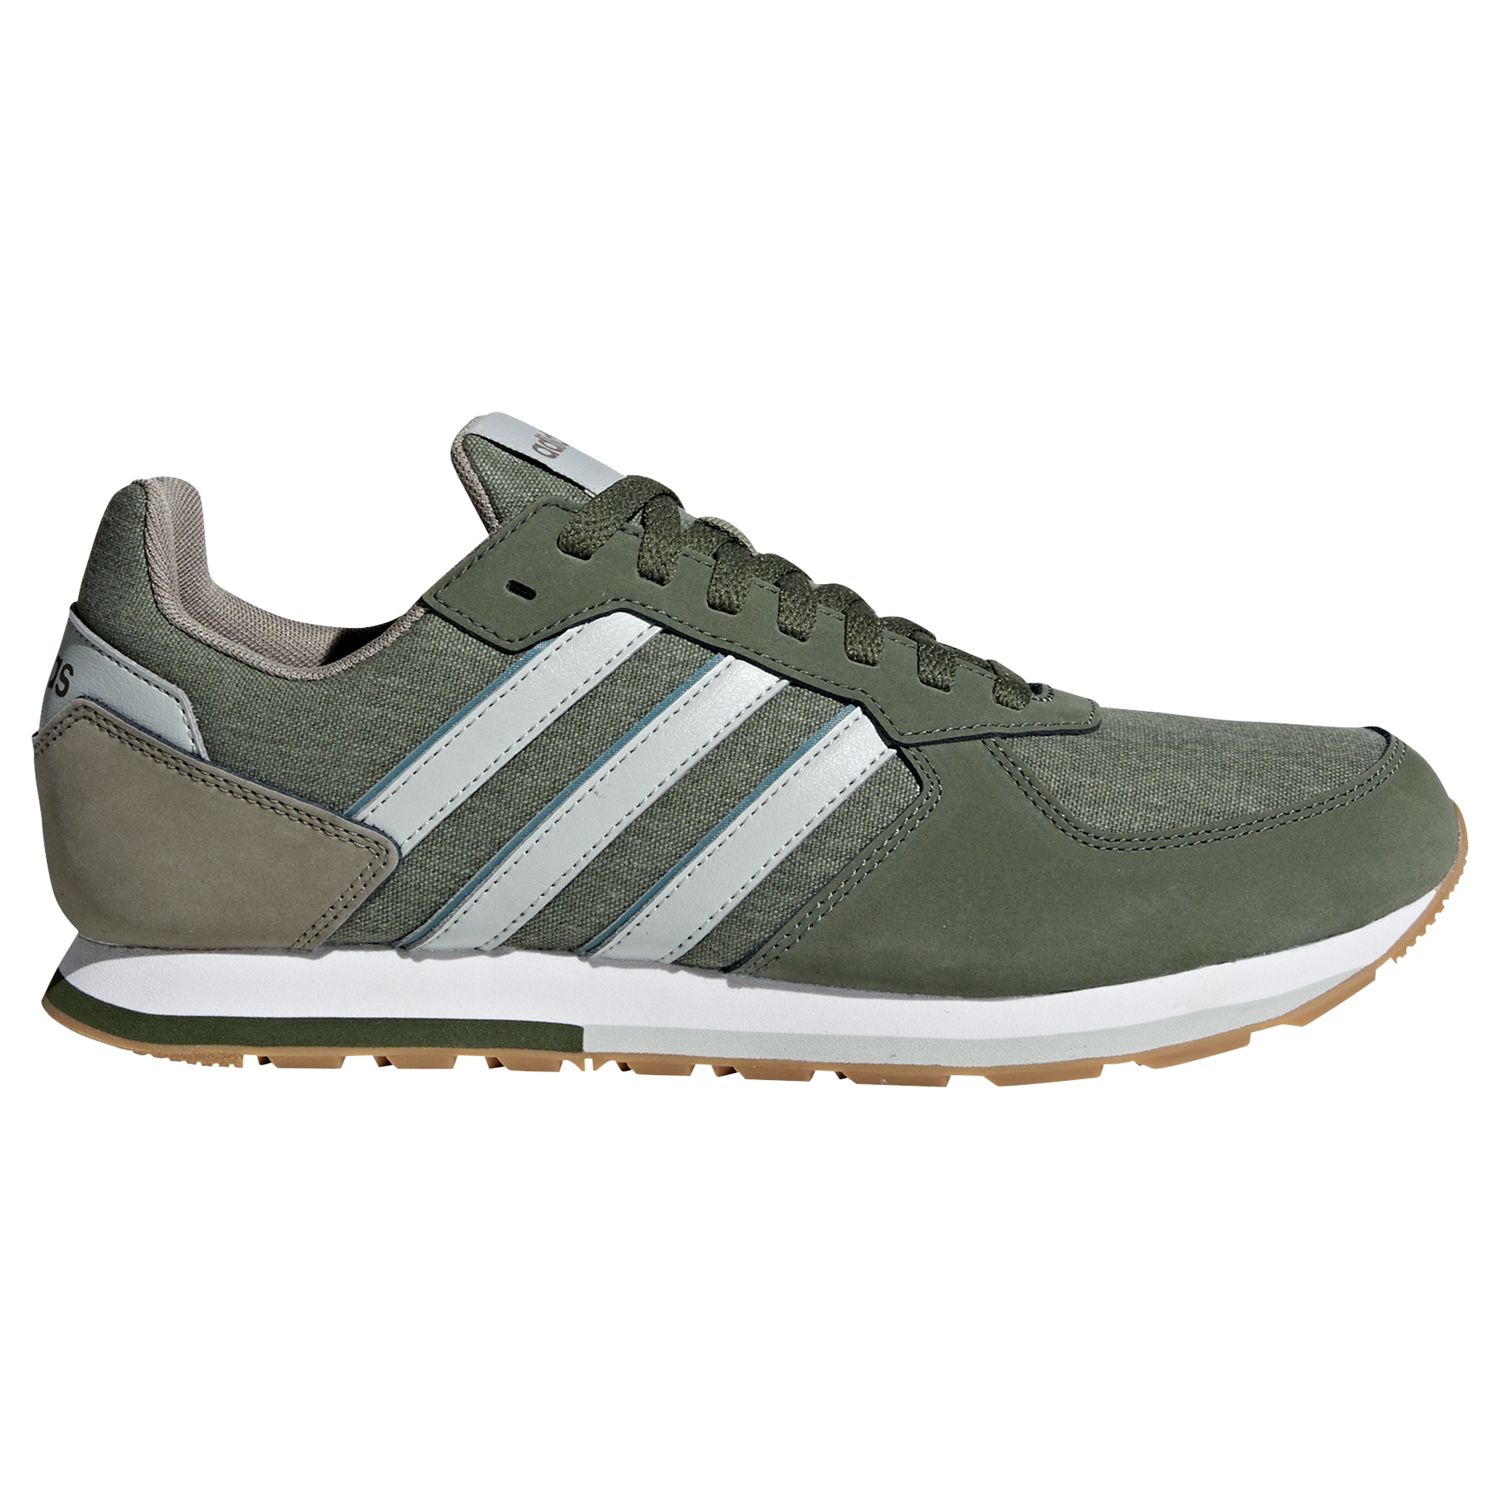 adidas green trainers mens